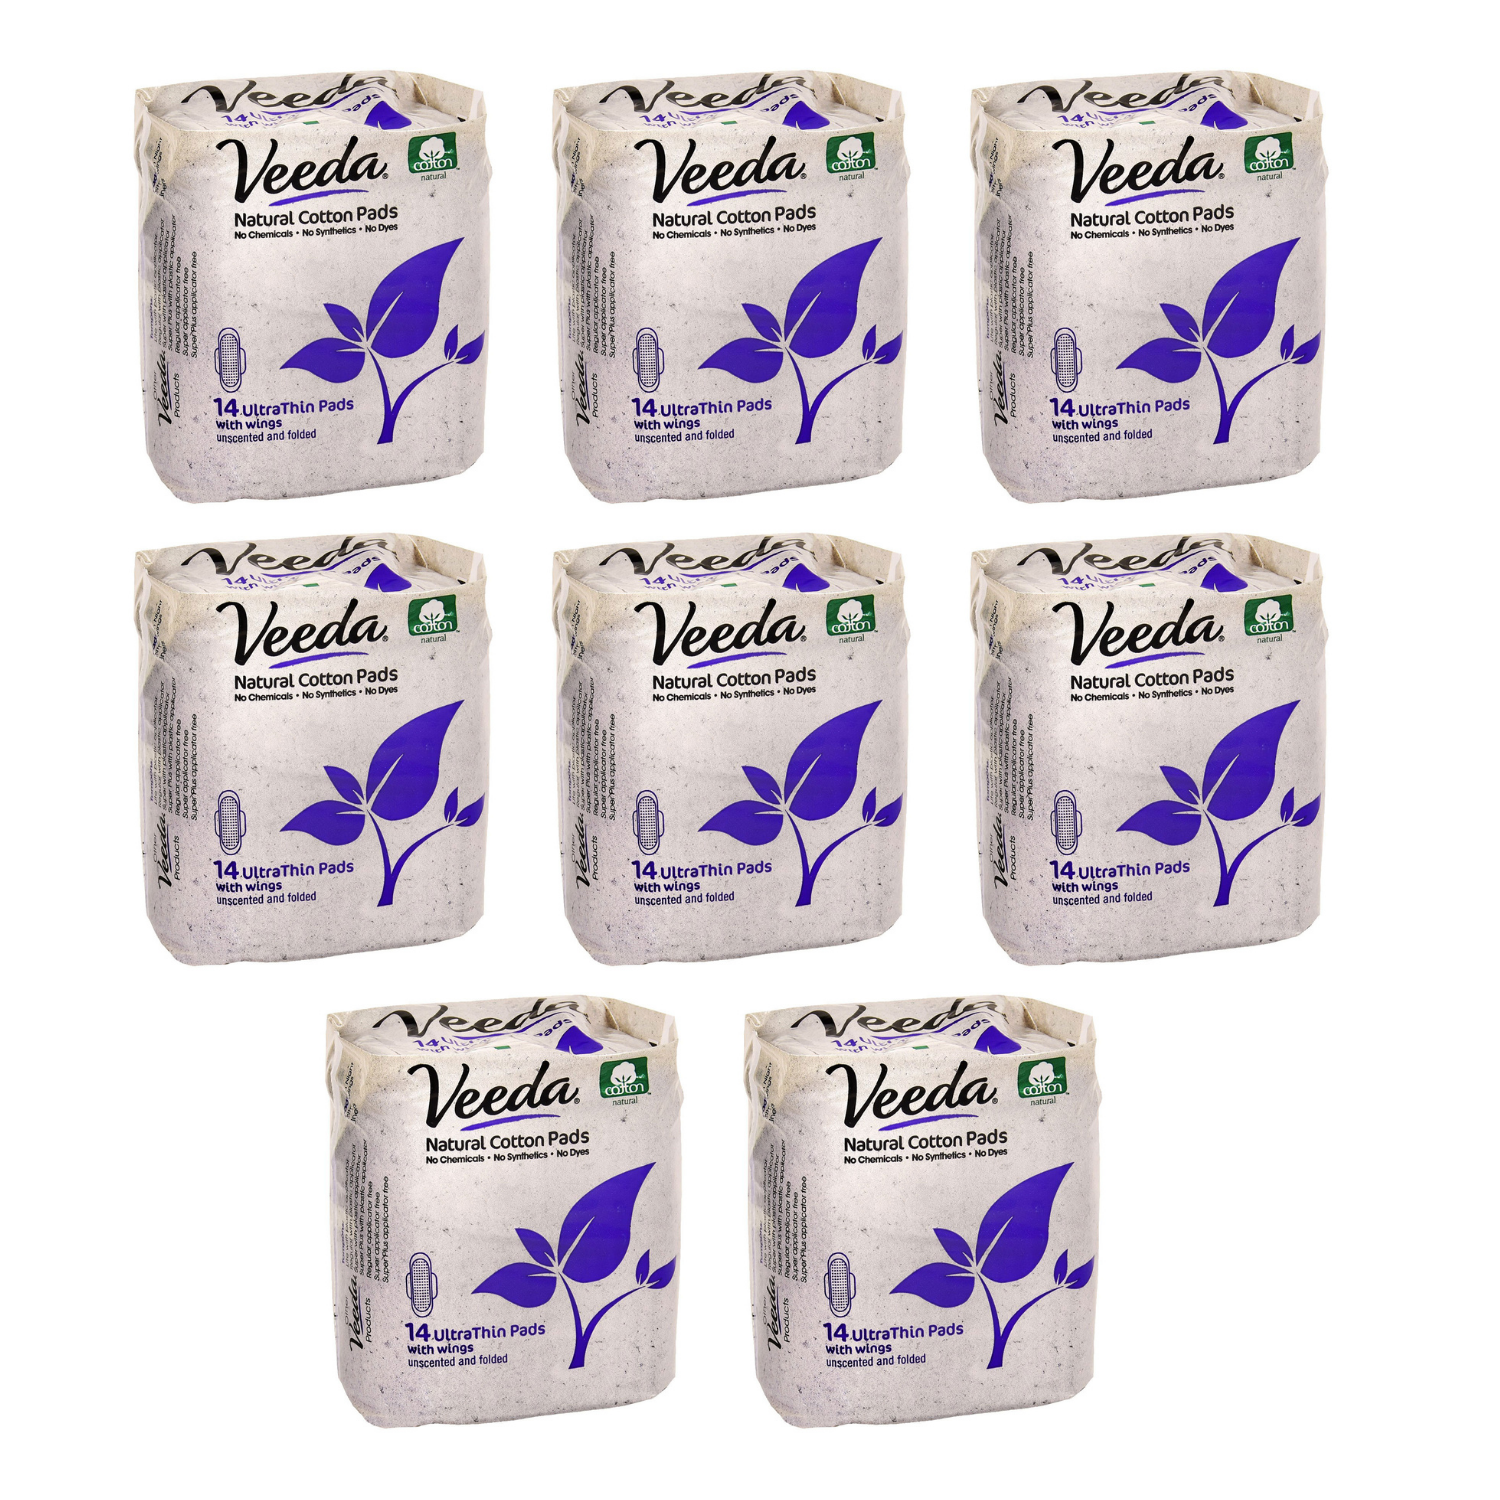 Veeda Ultra Thin Natural Cotton Day Pads 8 Packs x 14 Pads